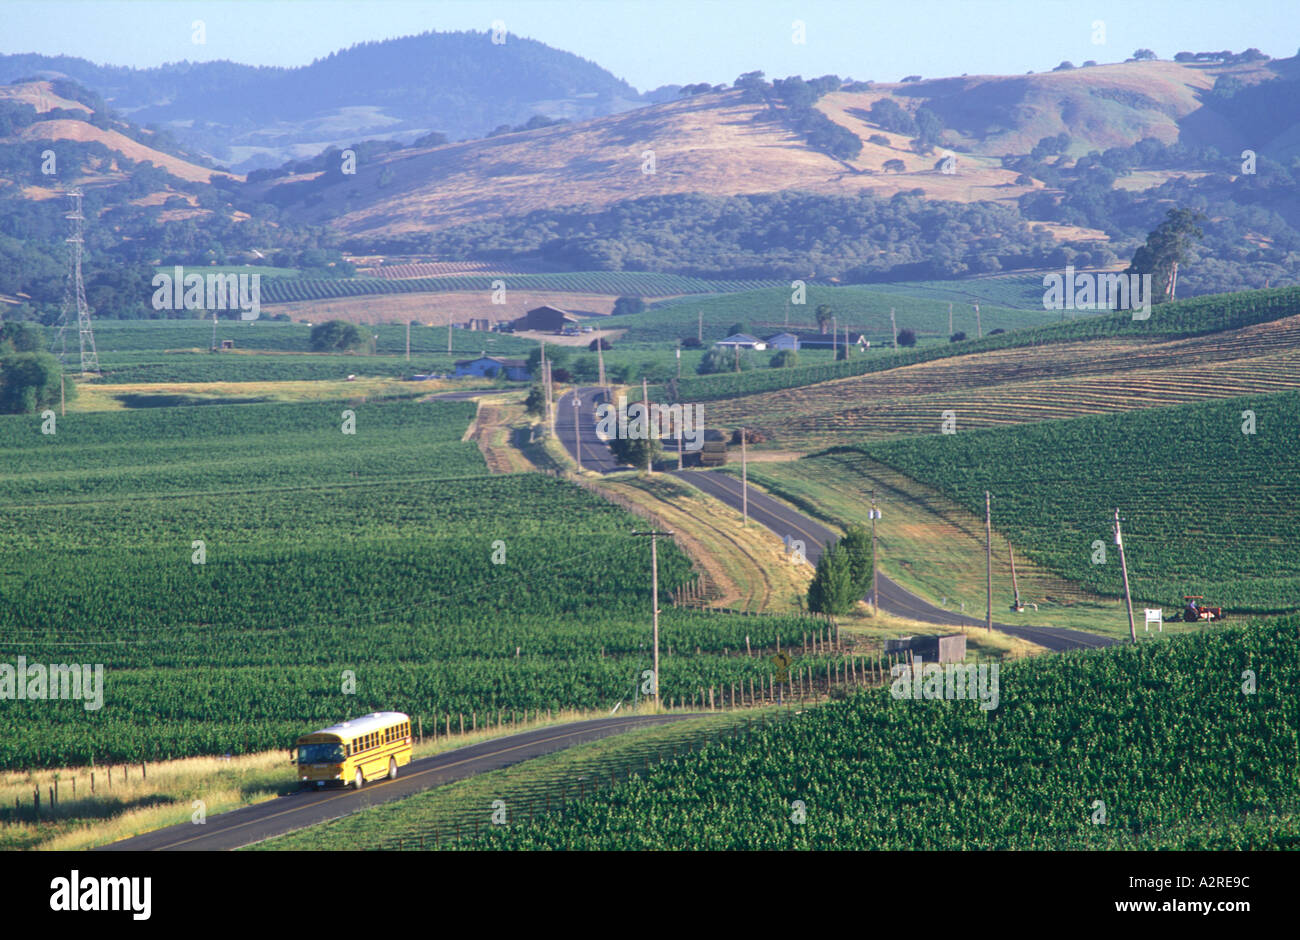 USA California Napa Valley Carneros Valley School bus on bus route through road in vineyards Stock Photo